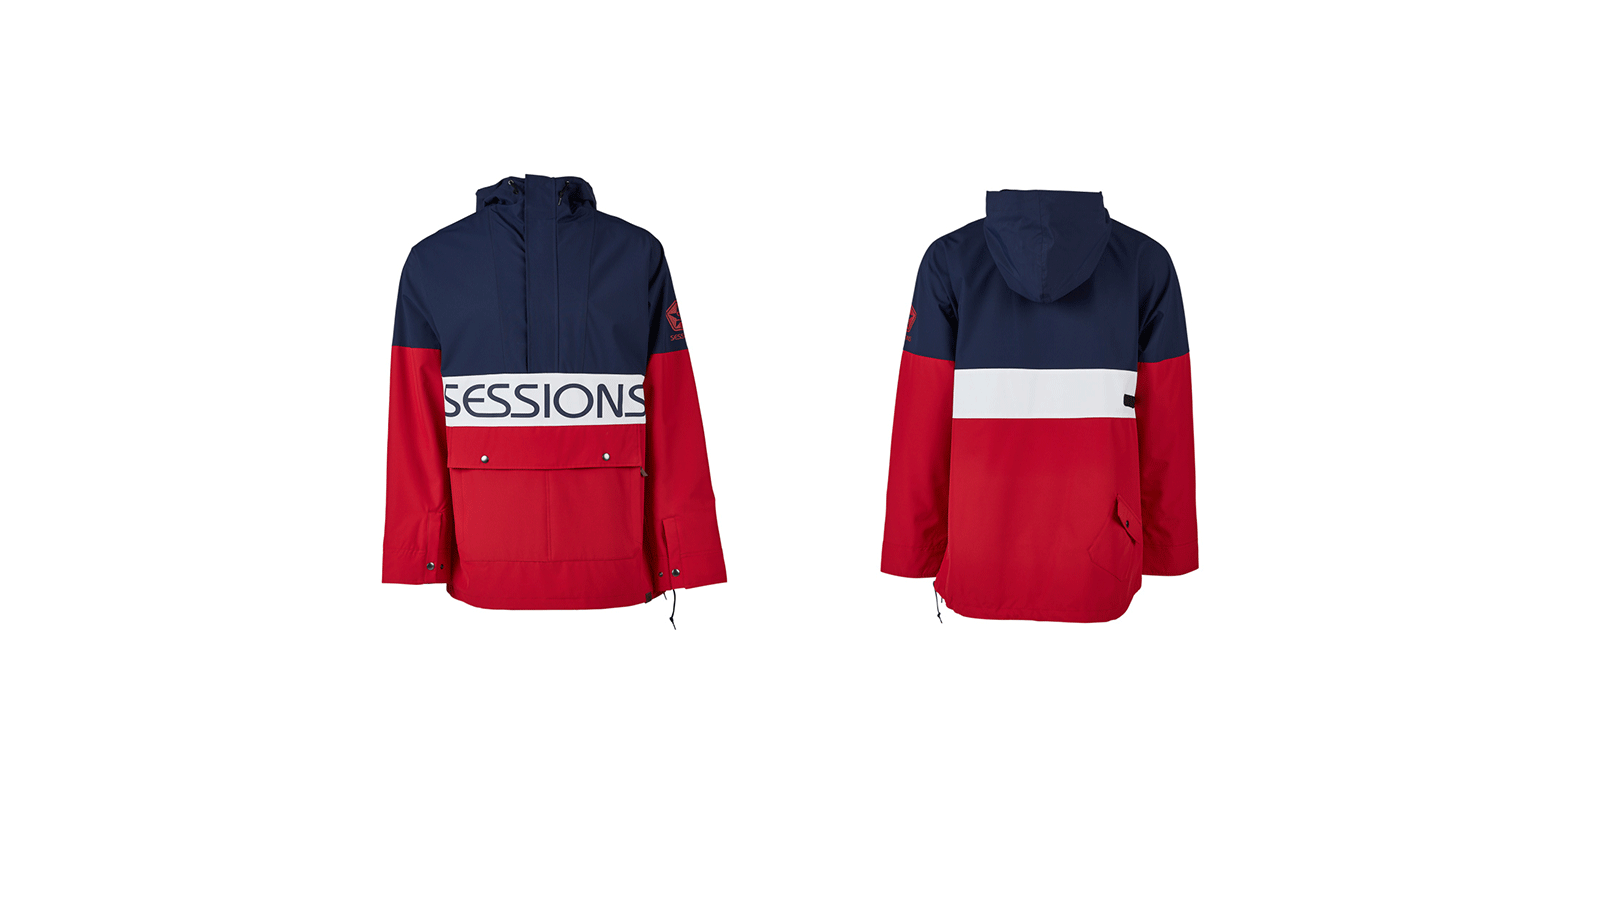 Sessions-FW19-20-Chaos-Jacket-MRM0195